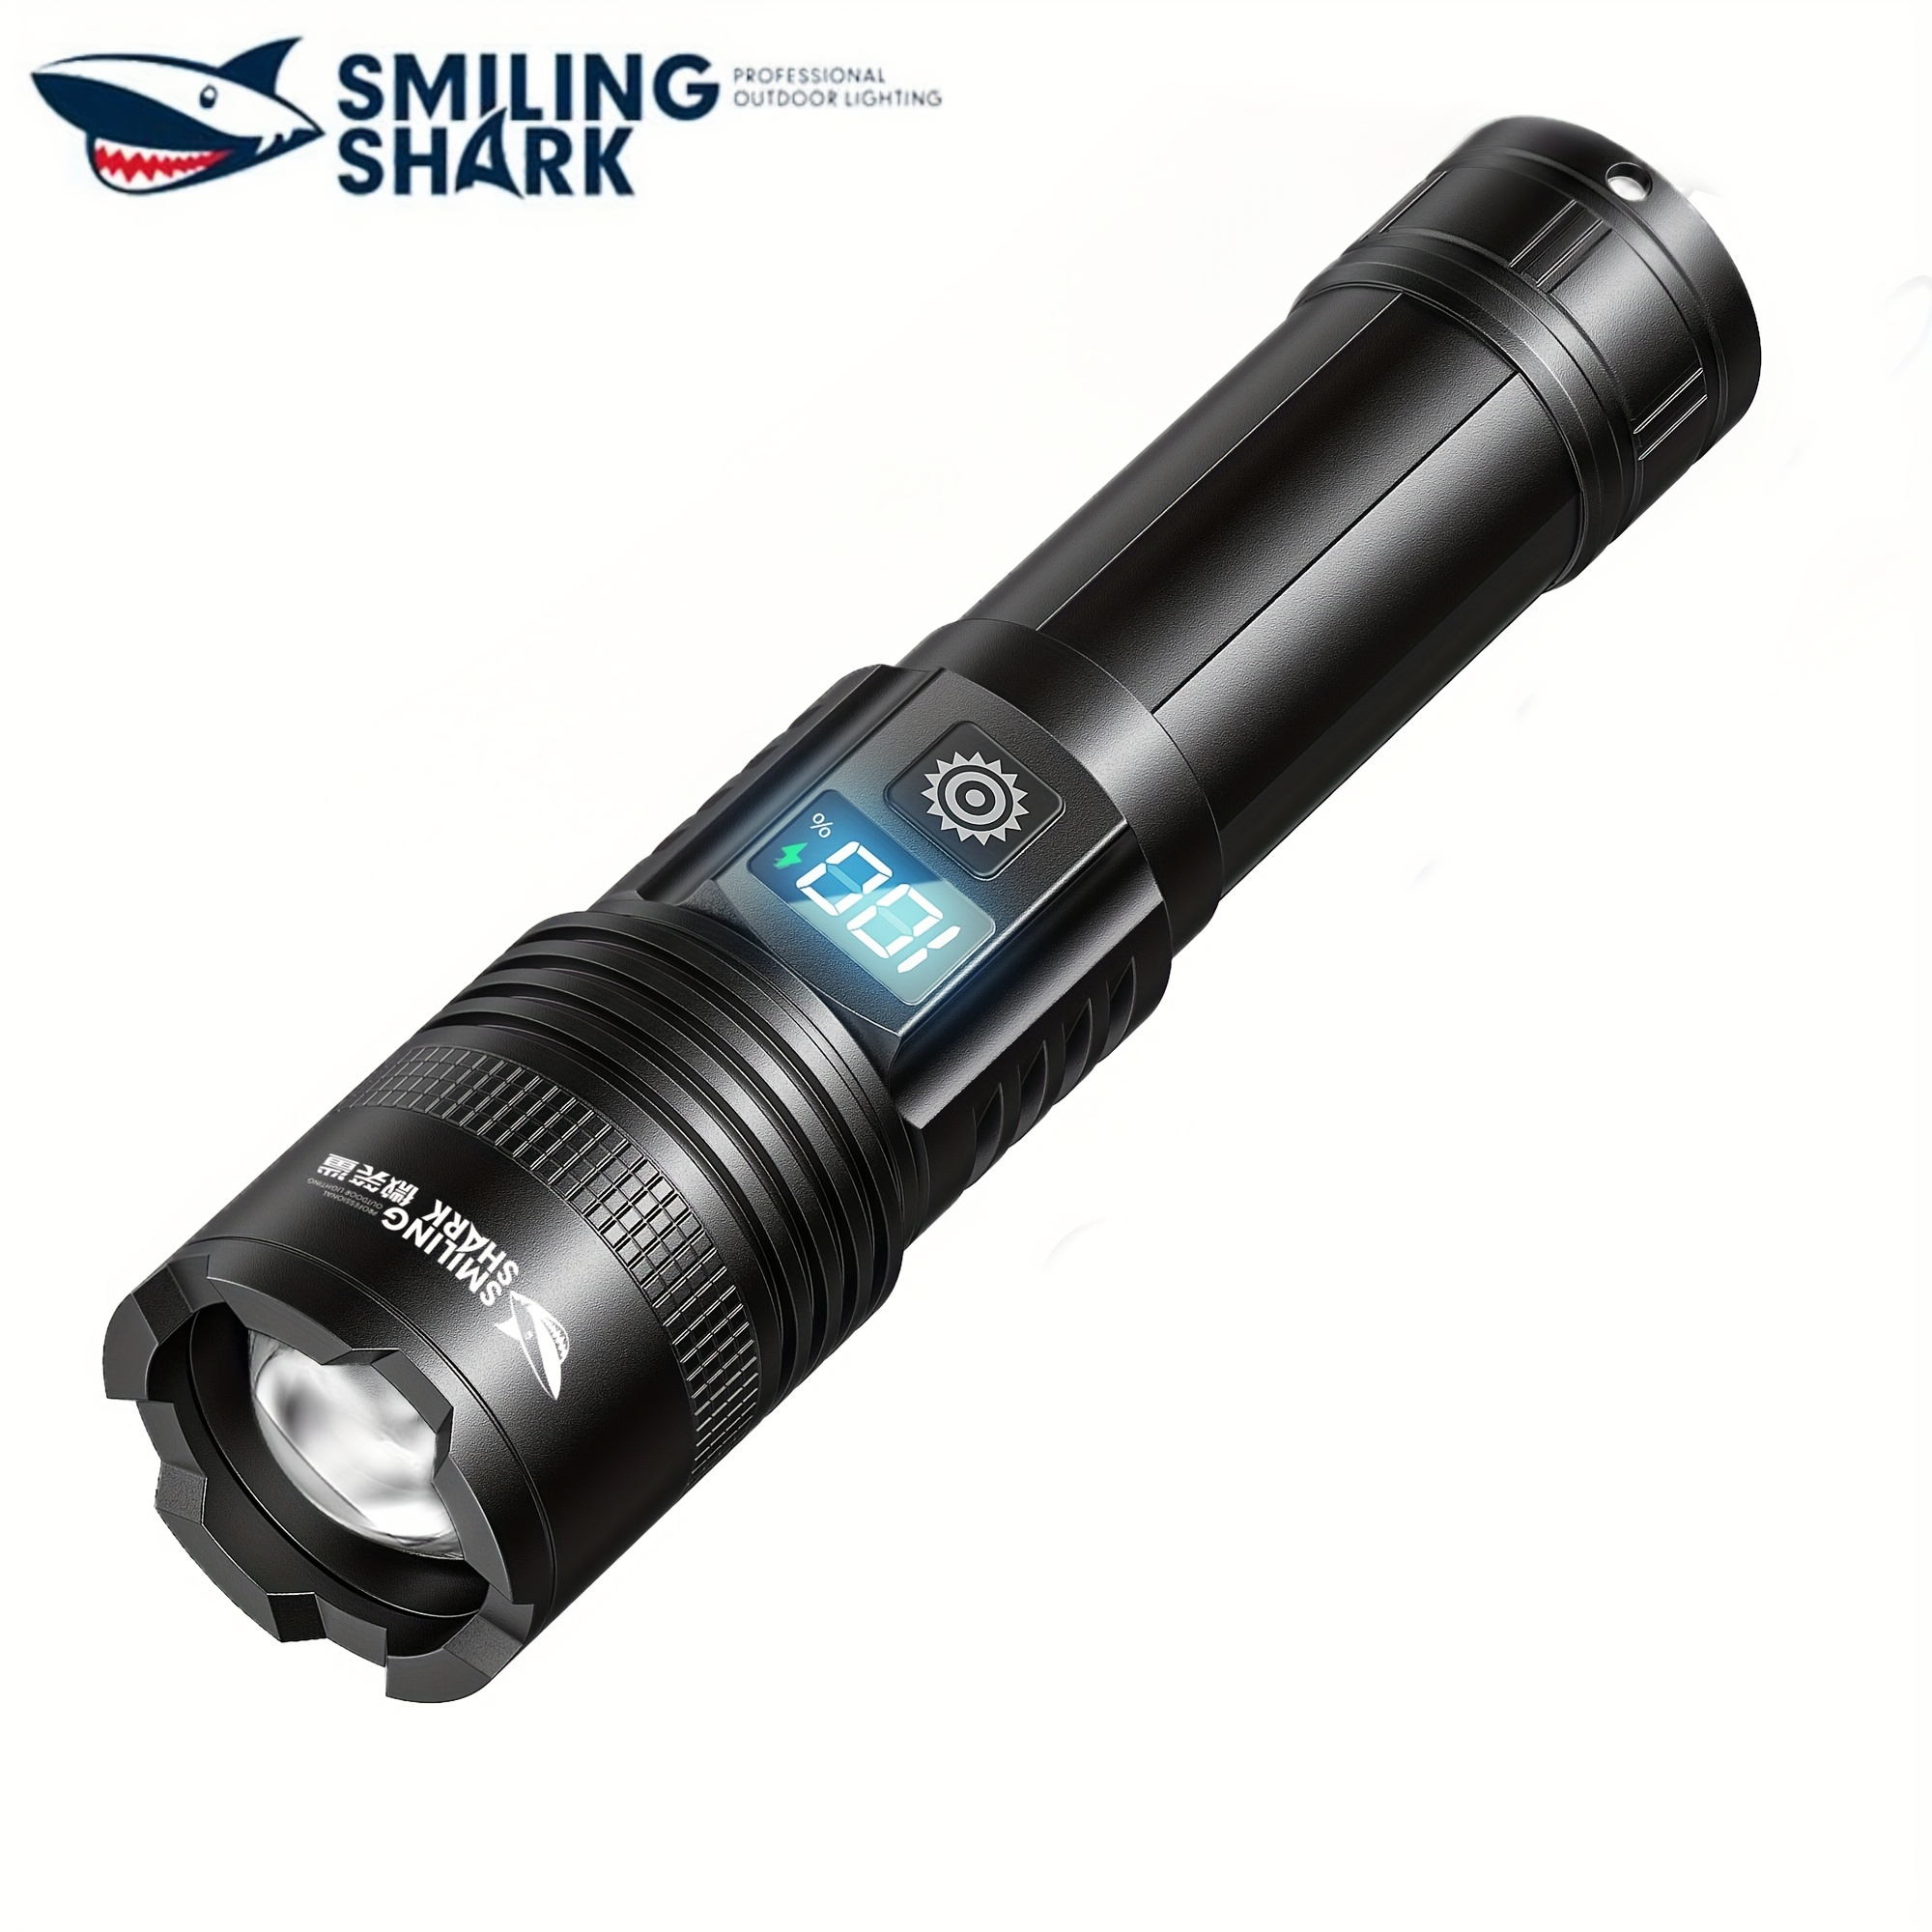 High Power Led Flashlight Powerful Usb Rechargeable Torch Outdoor